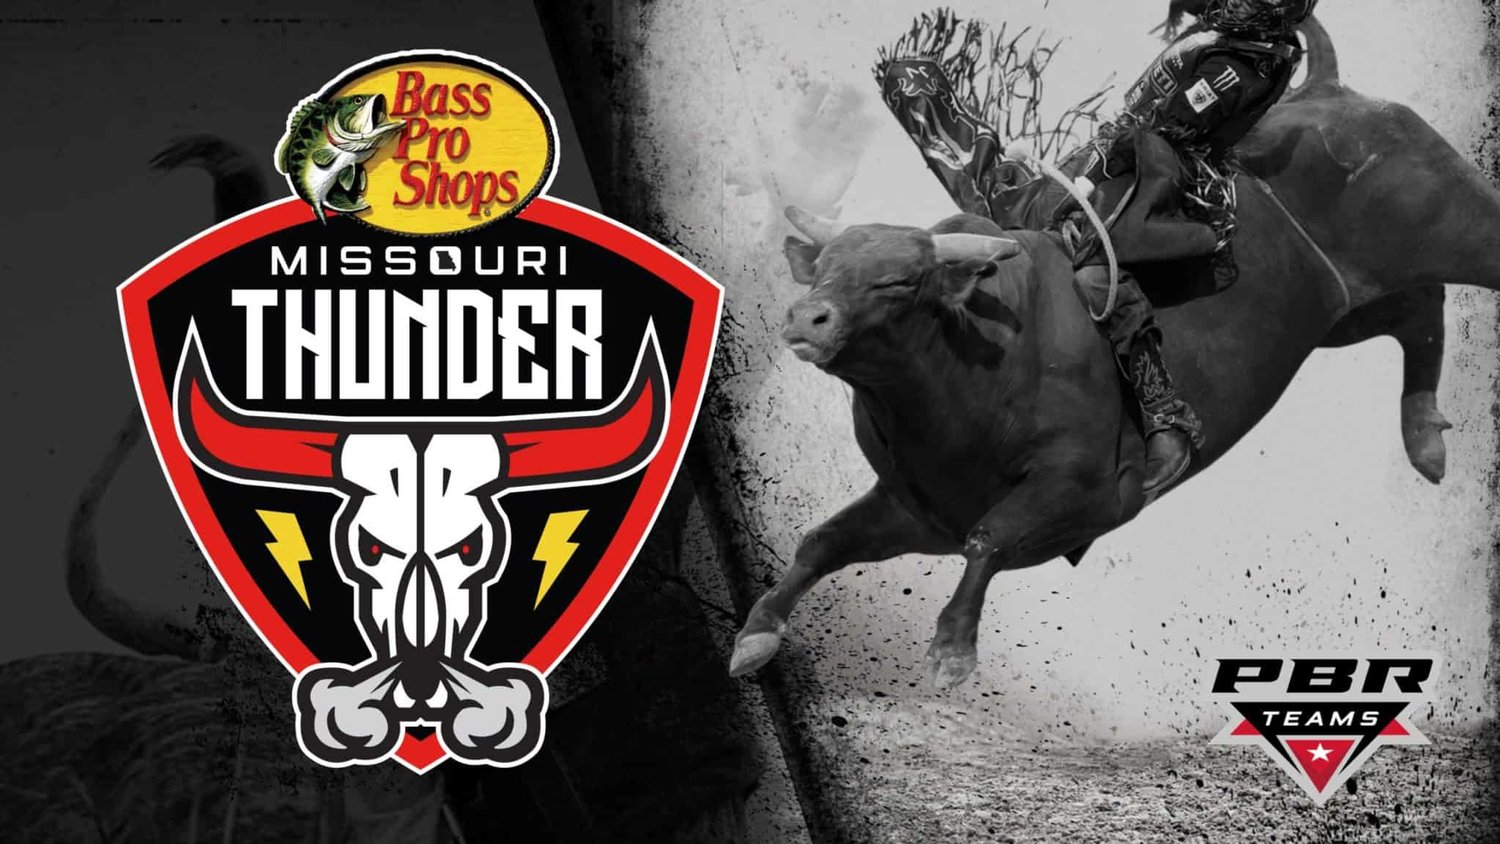 Bass Pro Shops is one of the founding franchise owners in the new PBR Team Series.